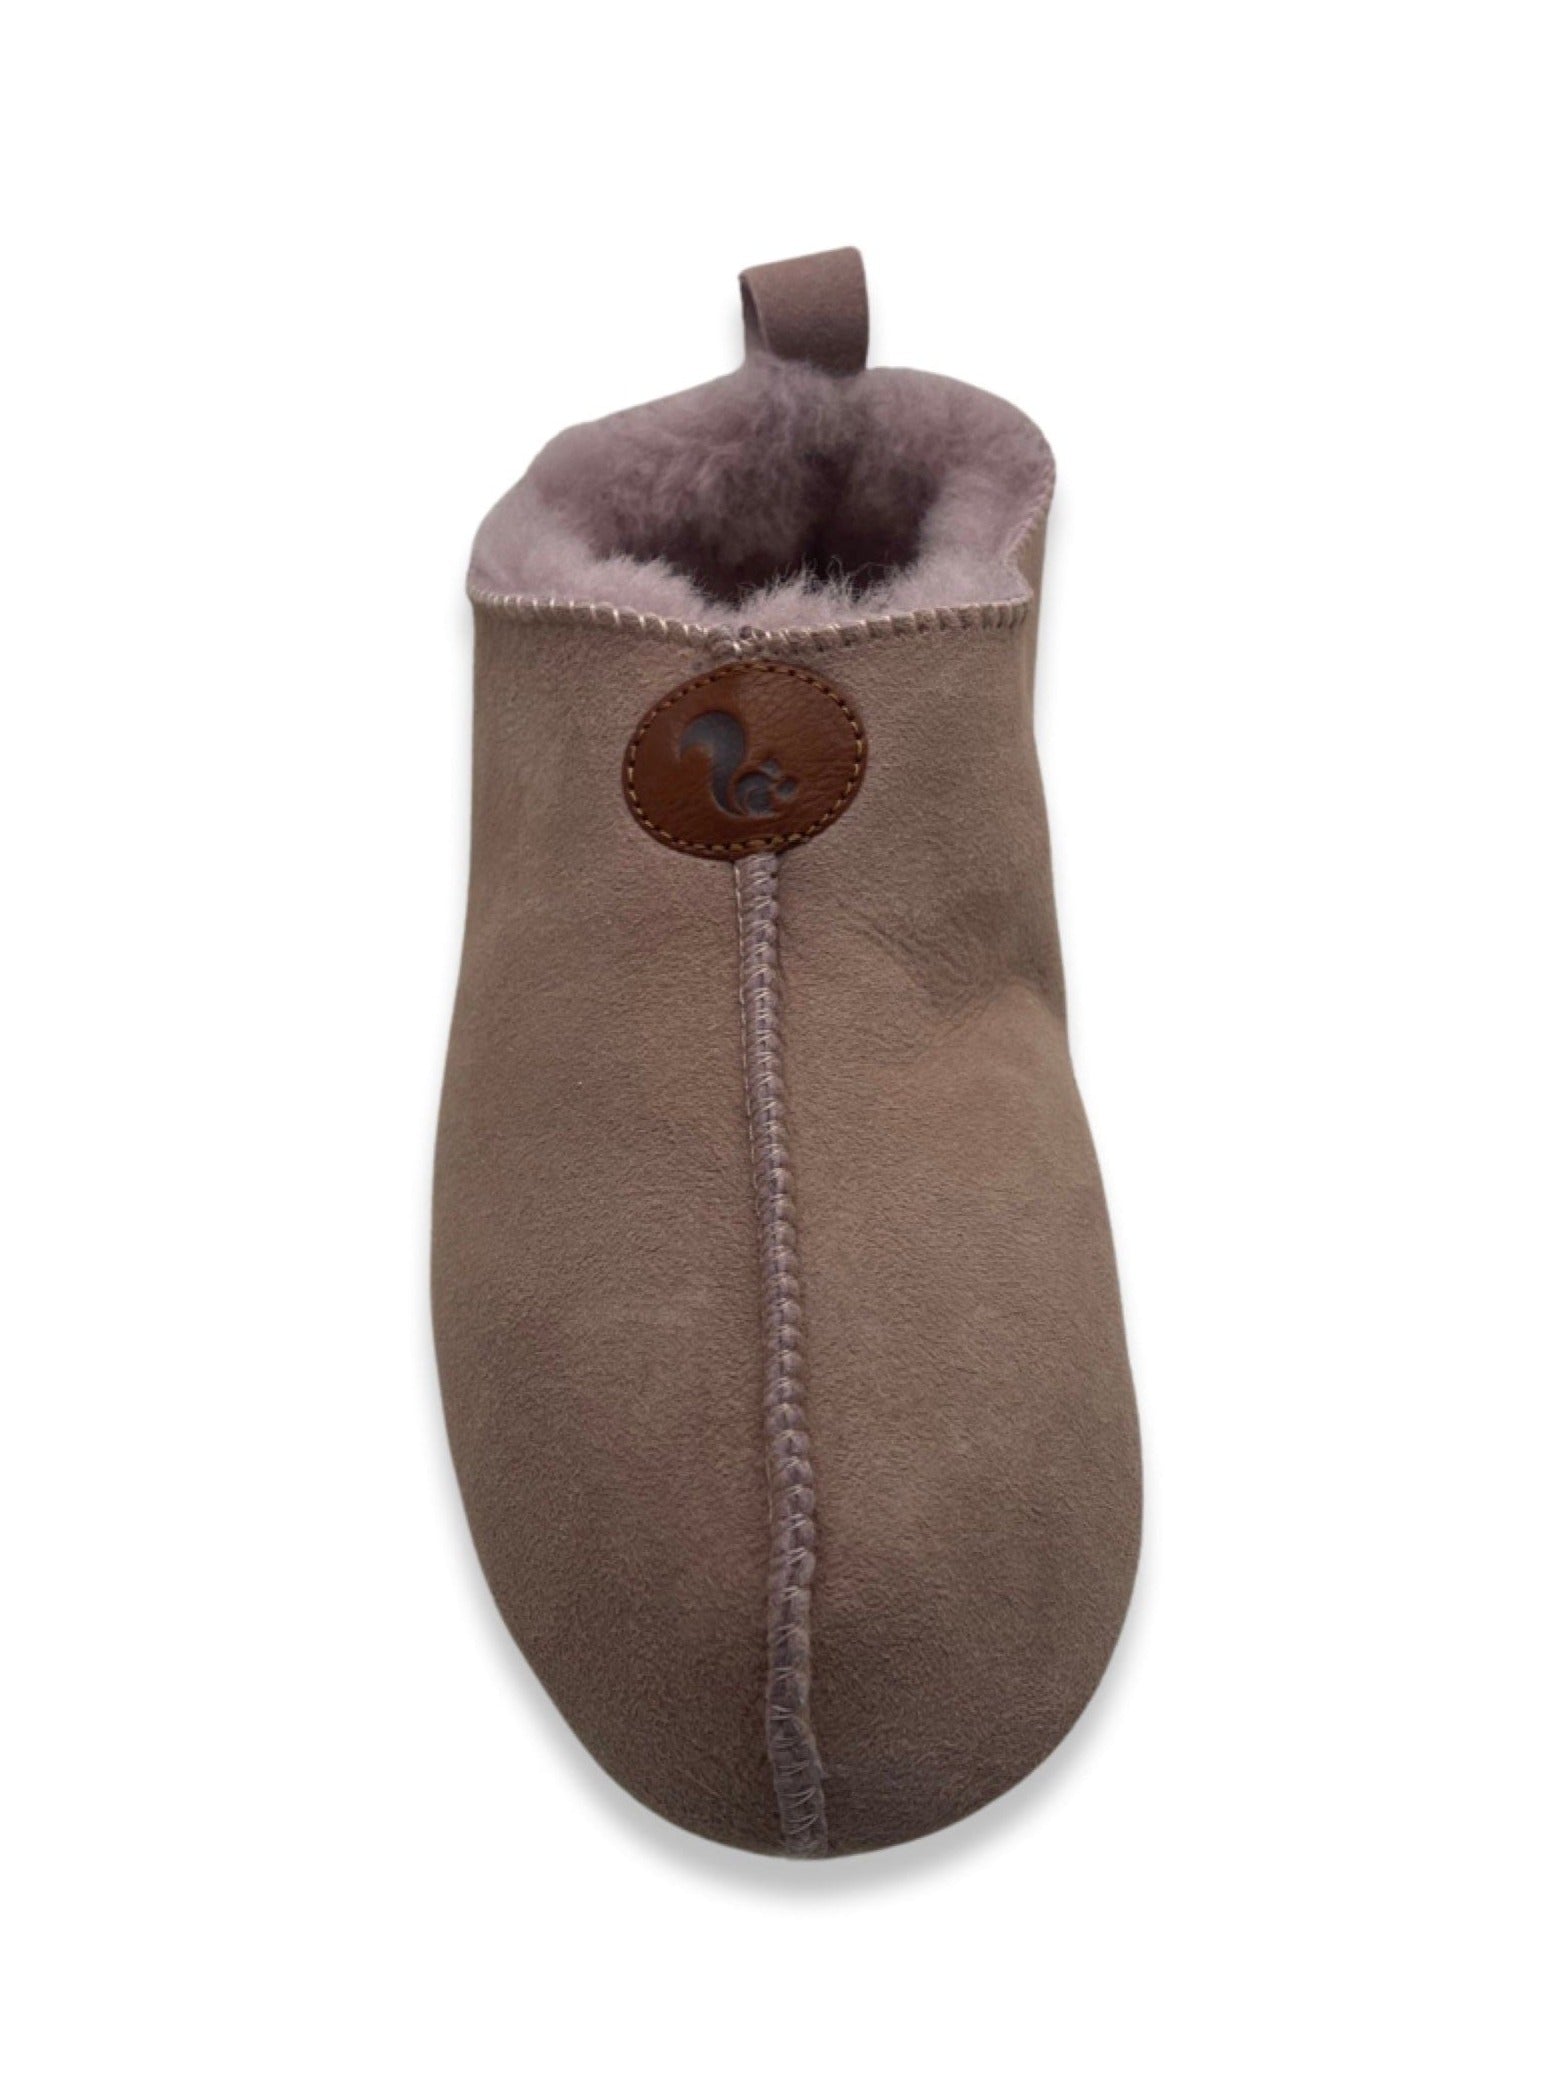 Sustainable Slipper Boot in Sheepskin Leather, eco-friendly, ethical. Slow Nature®